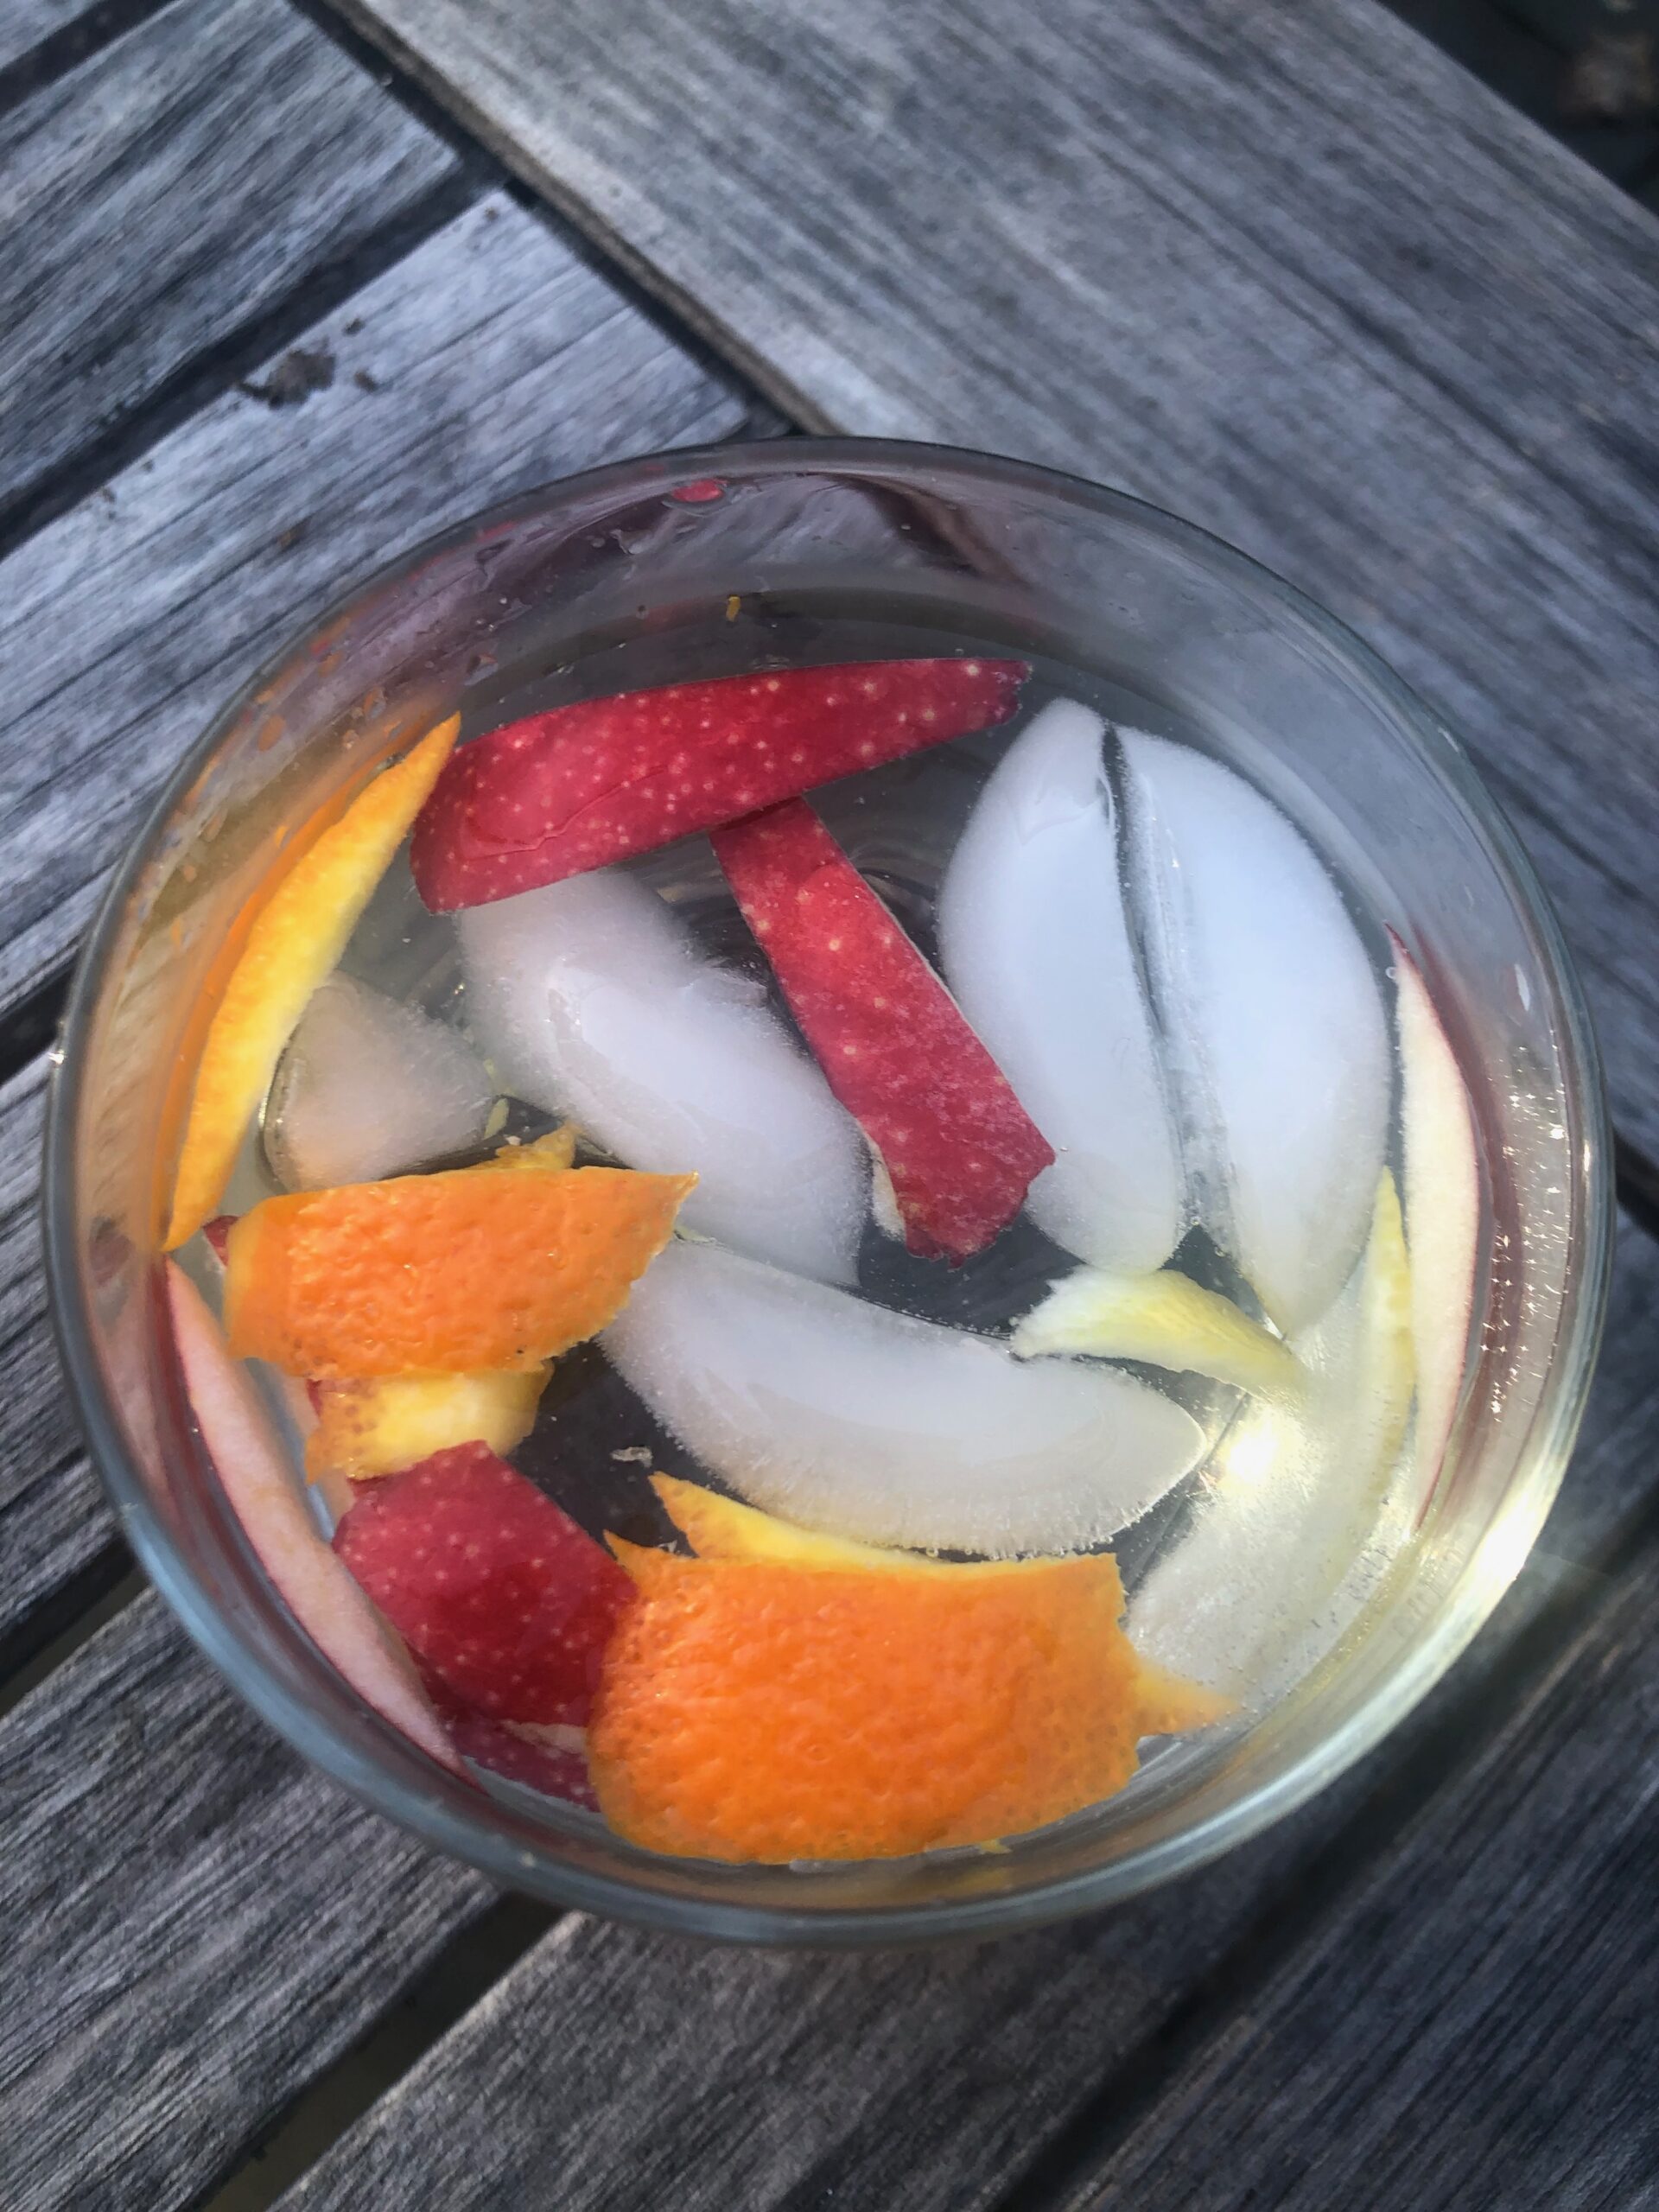 Hate the non-taste of water? Use peels from citrus fruits, apples, cucumbers and even strawberry tops to give water some kick. Once finished, toss the soft fruit into a smoothie for a zero-waste nutrition boost. JENNY NOBLE